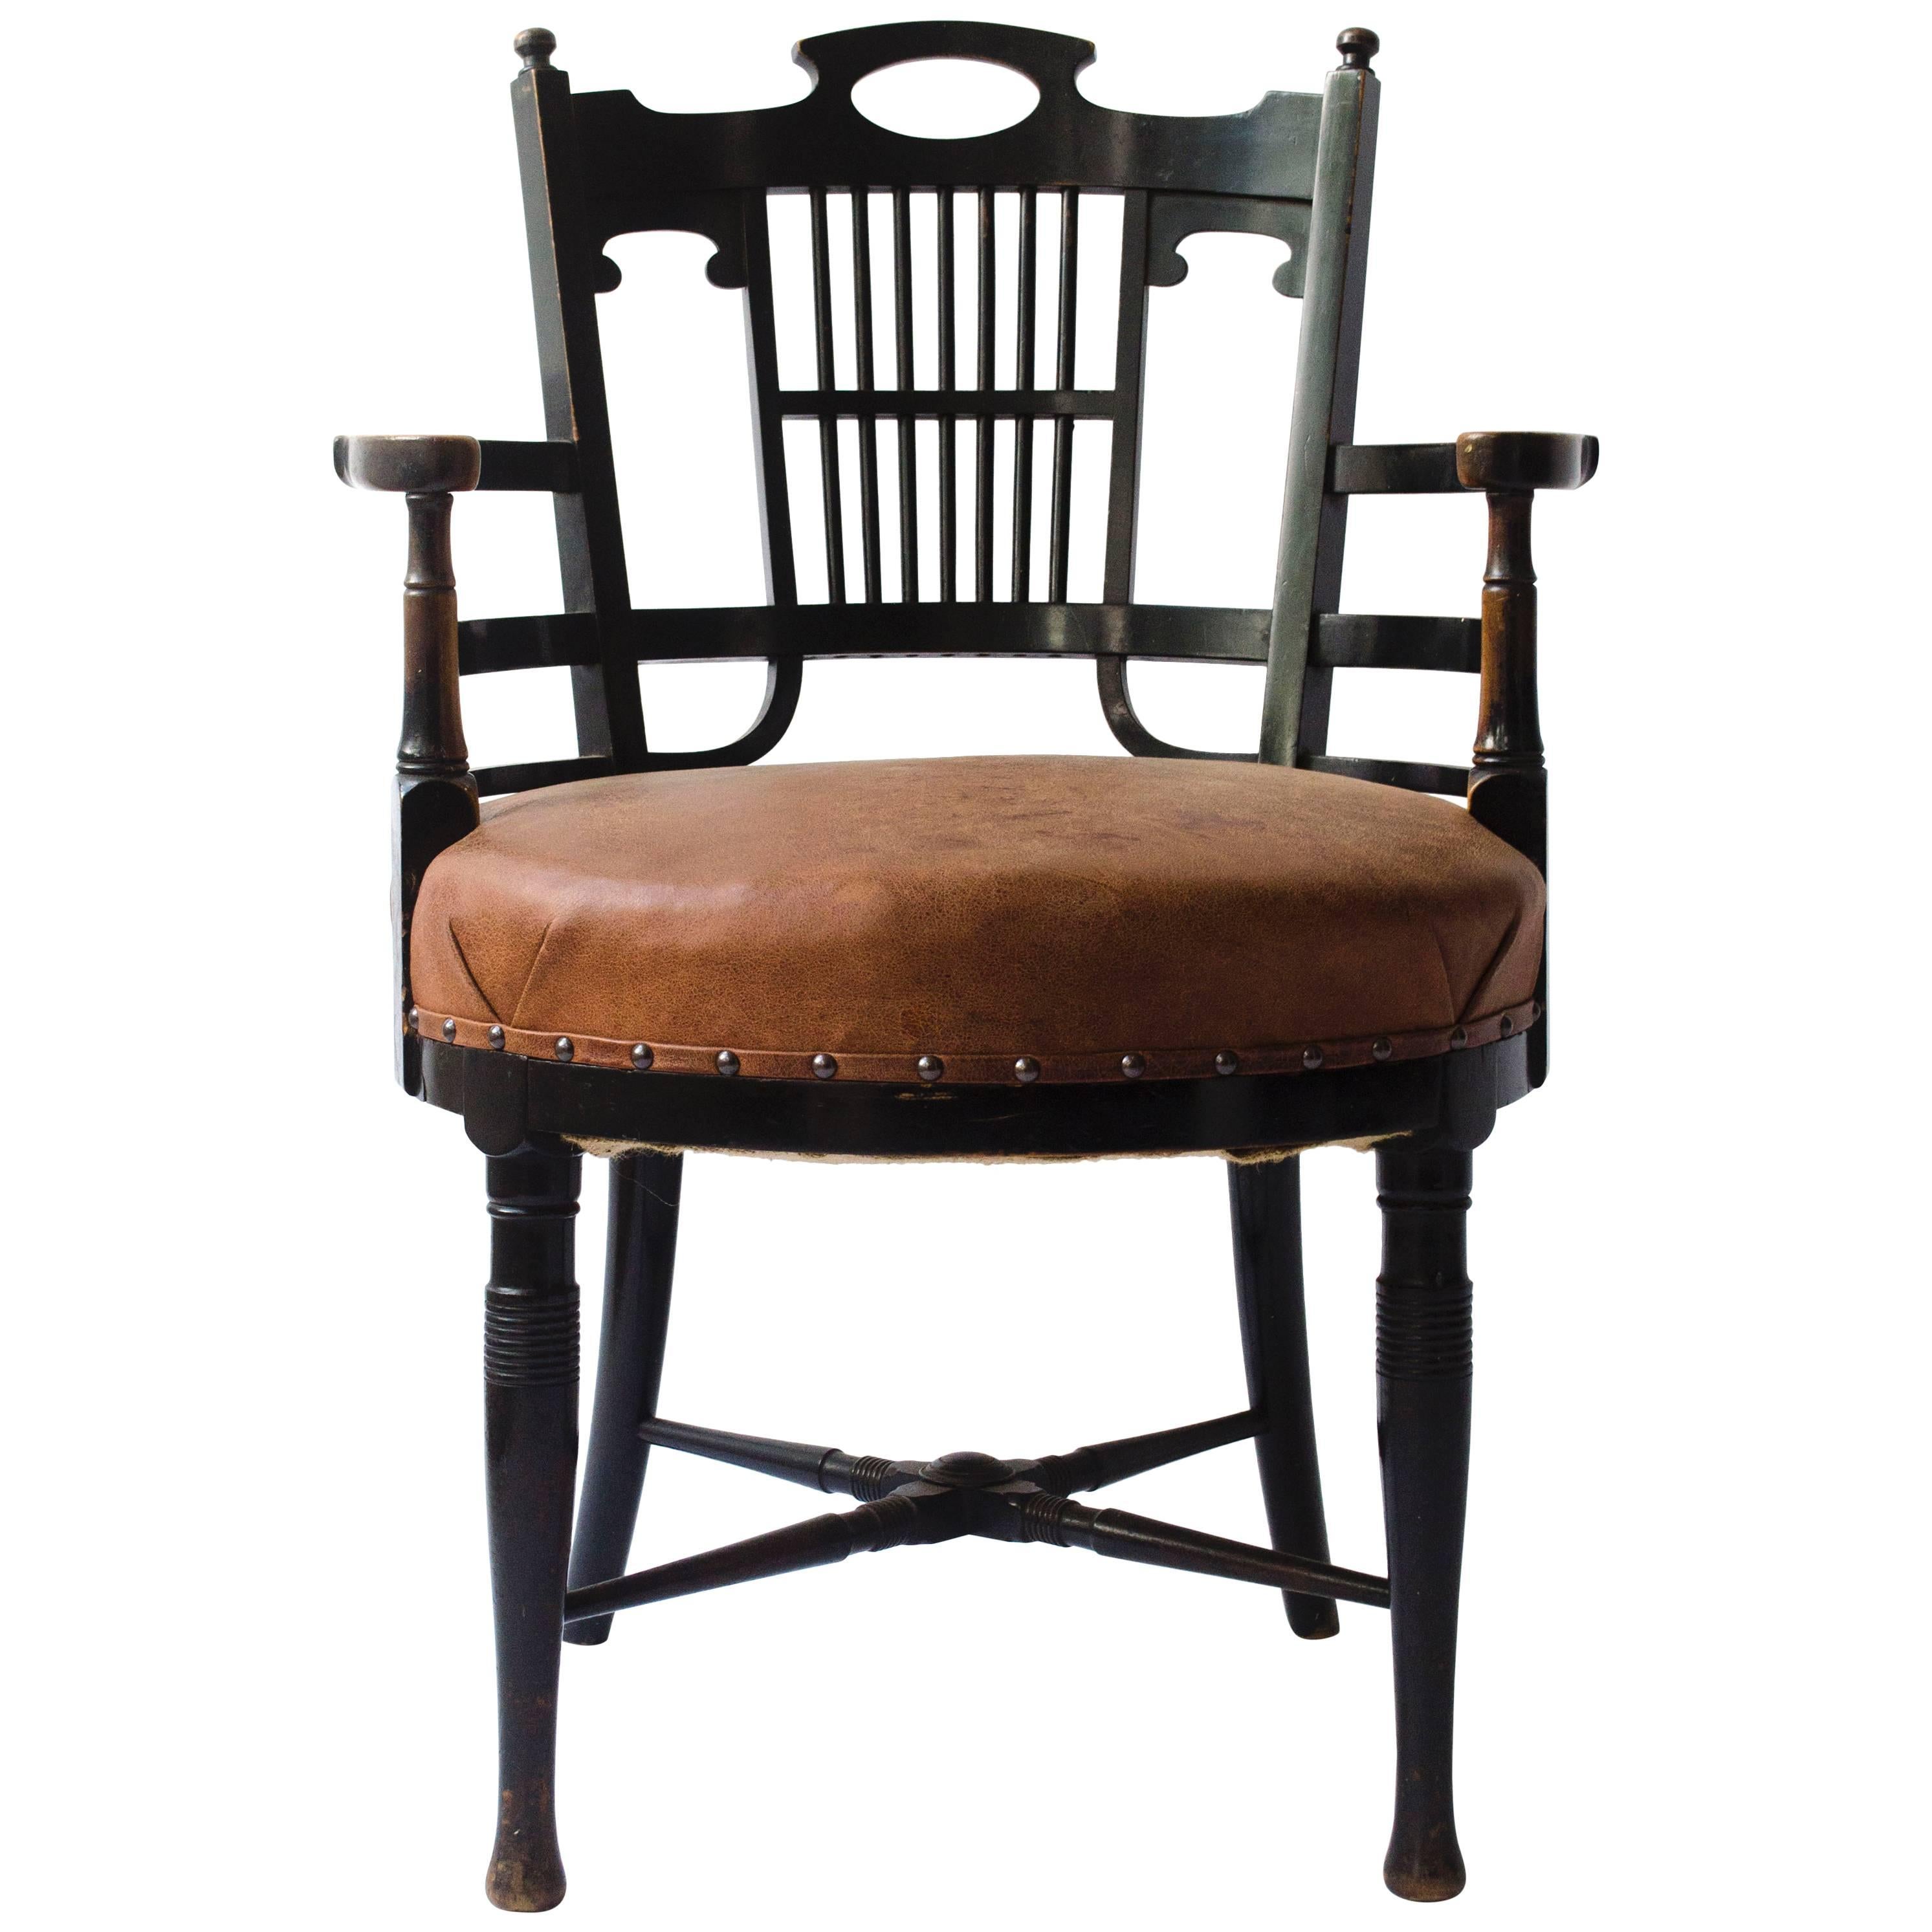 E W Godwin style of, An Anglo-Japanese Old English or Jacobean Ebonized Armchair For Sale